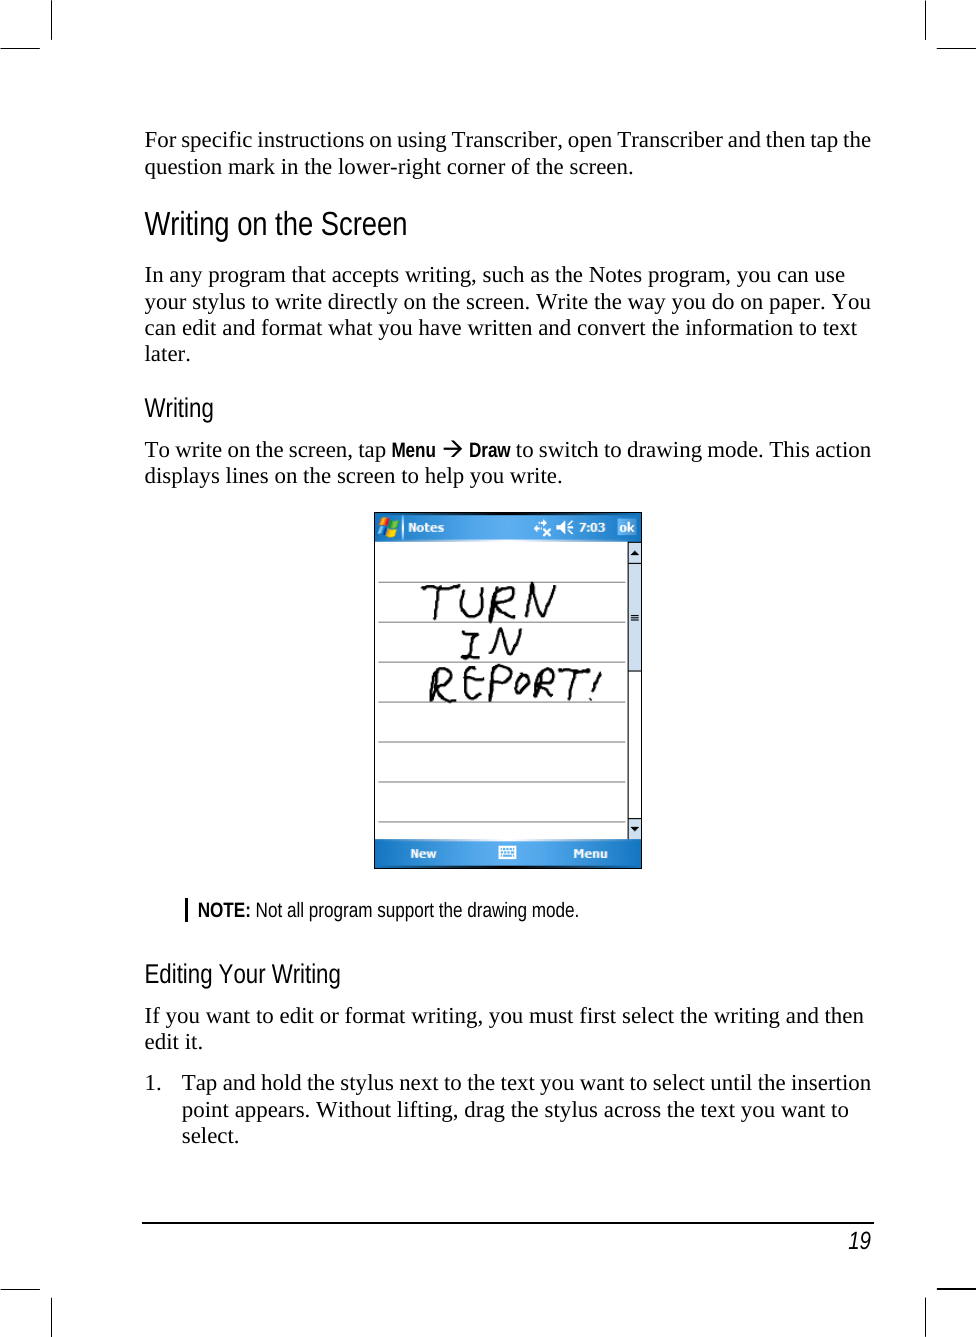   19 For specific instructions on using Transcriber, open Transcriber and then tap the question mark in the lower-right corner of the screen. Writing on the Screen In any program that accepts writing, such as the Notes program, you can use your stylus to write directly on the screen. Write the way you do on paper. You can edit and format what you have written and convert the information to text later. Writing To write on the screen, tap Menu  Draw to switch to drawing mode. This action displays lines on the screen to help you write.  NOTE: Not all program support the drawing mode.  Editing Your Writing If you want to edit or format writing, you must first select the writing and then edit it. 1.  Tap and hold the stylus next to the text you want to select until the insertion point appears. Without lifting, drag the stylus across the text you want to select. 